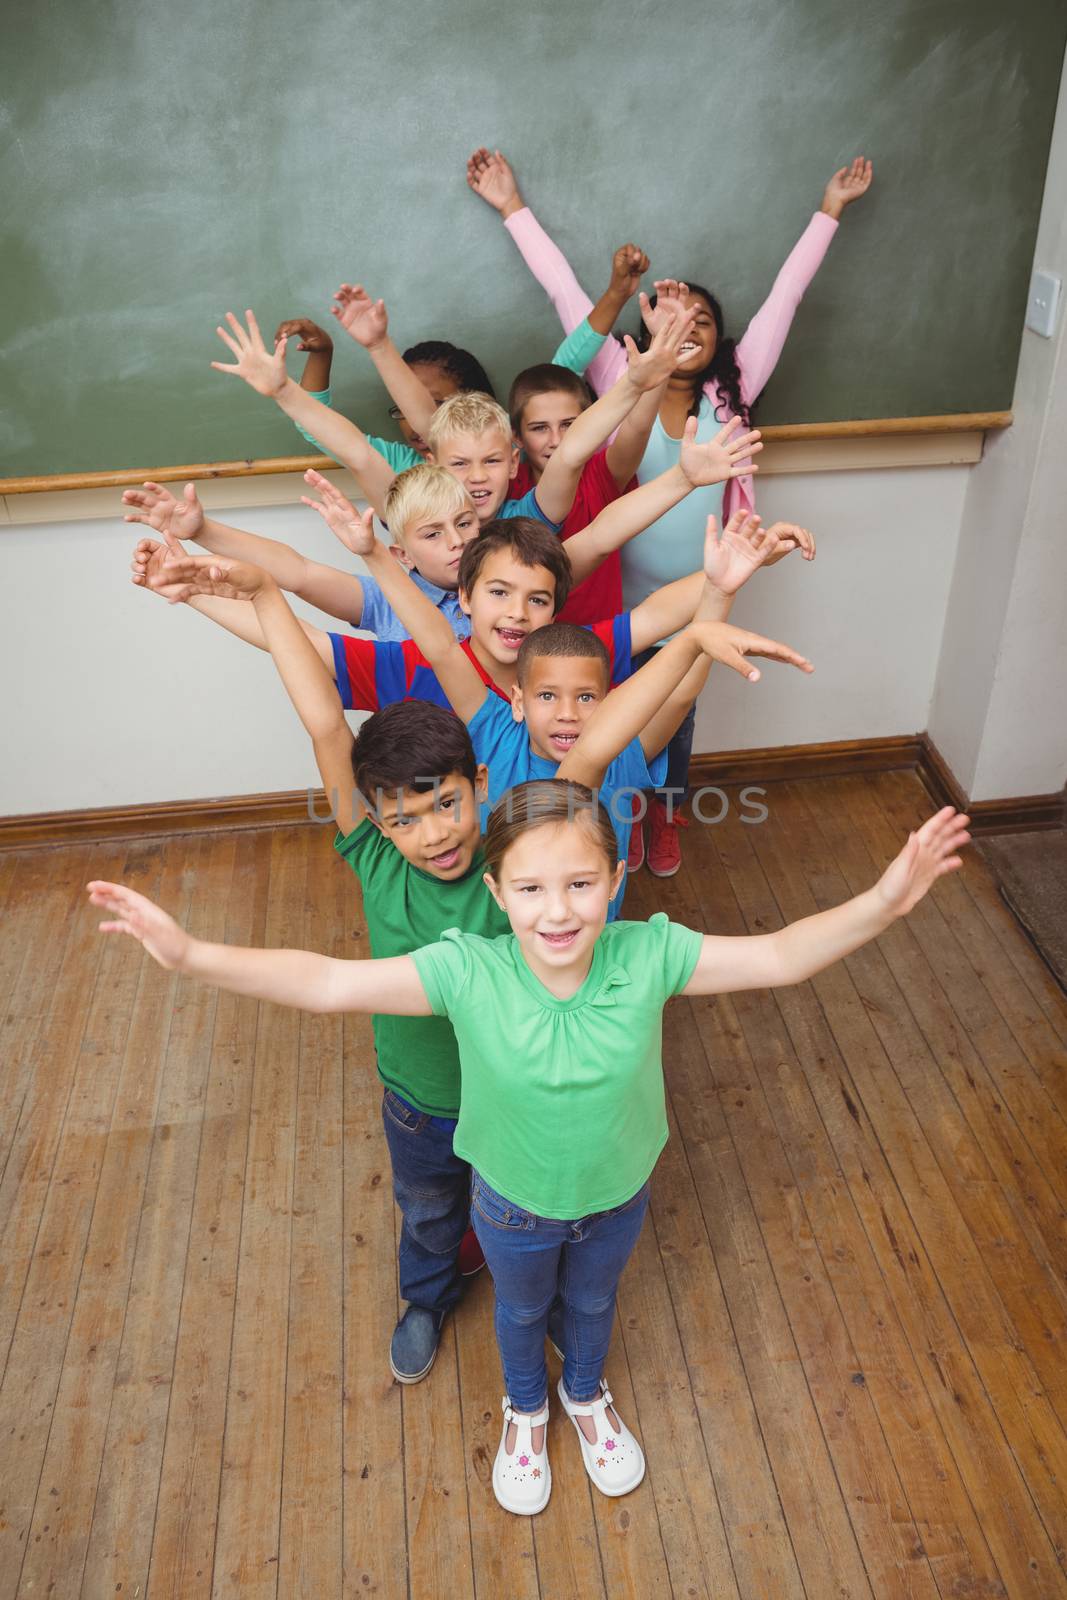 Students with arms raised together by Wavebreakmedia